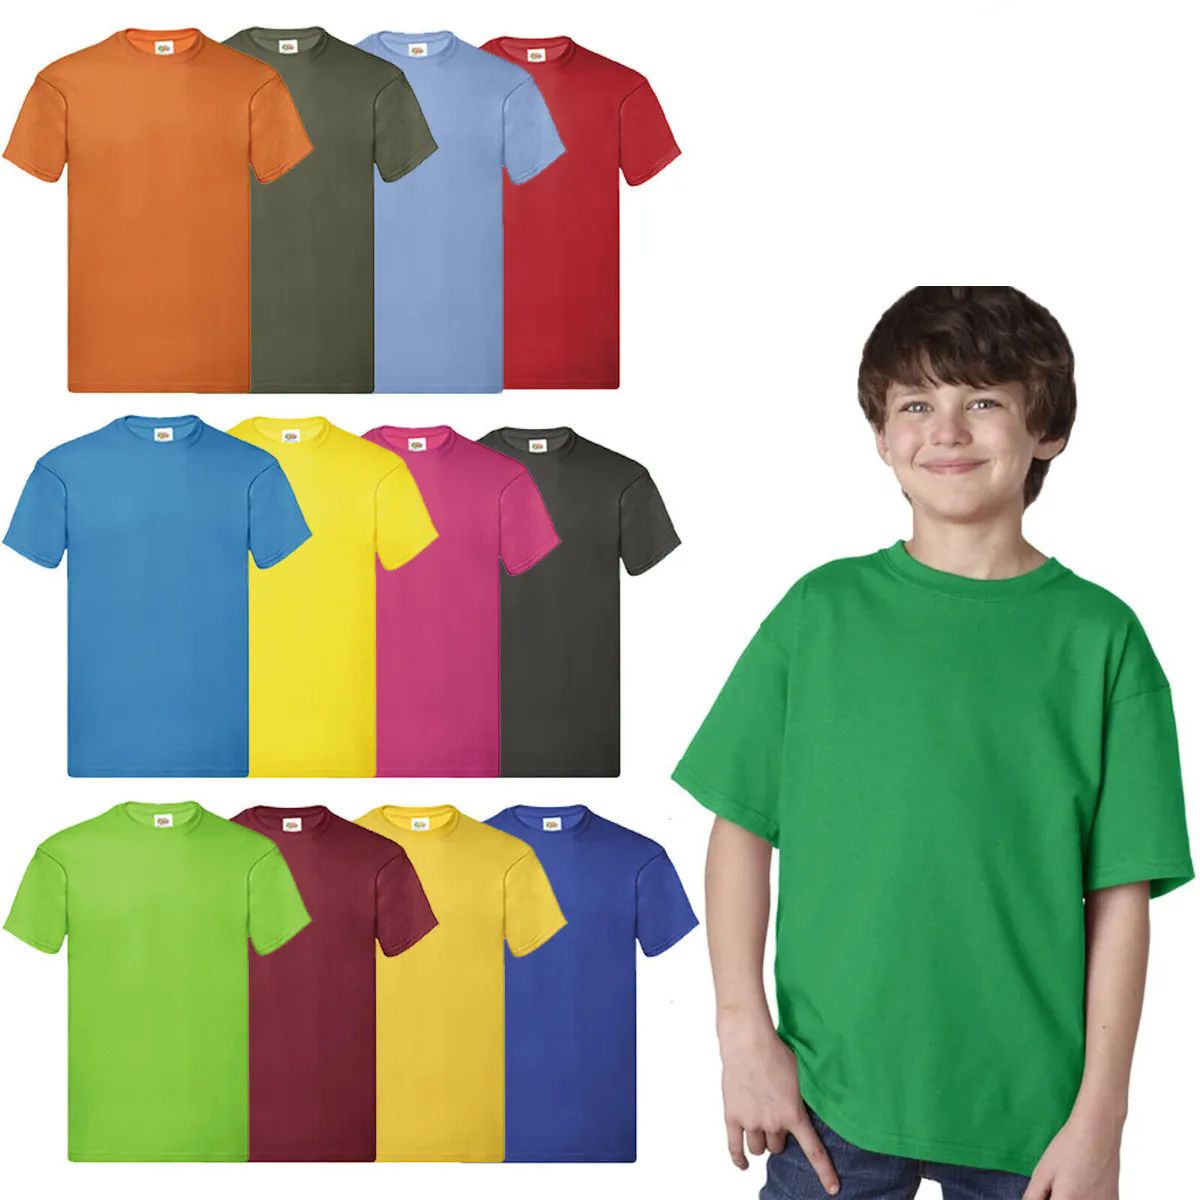 72 Pieces of Billionhats Kids Youth Cotton Assorted Colors T-Shirts Size Small